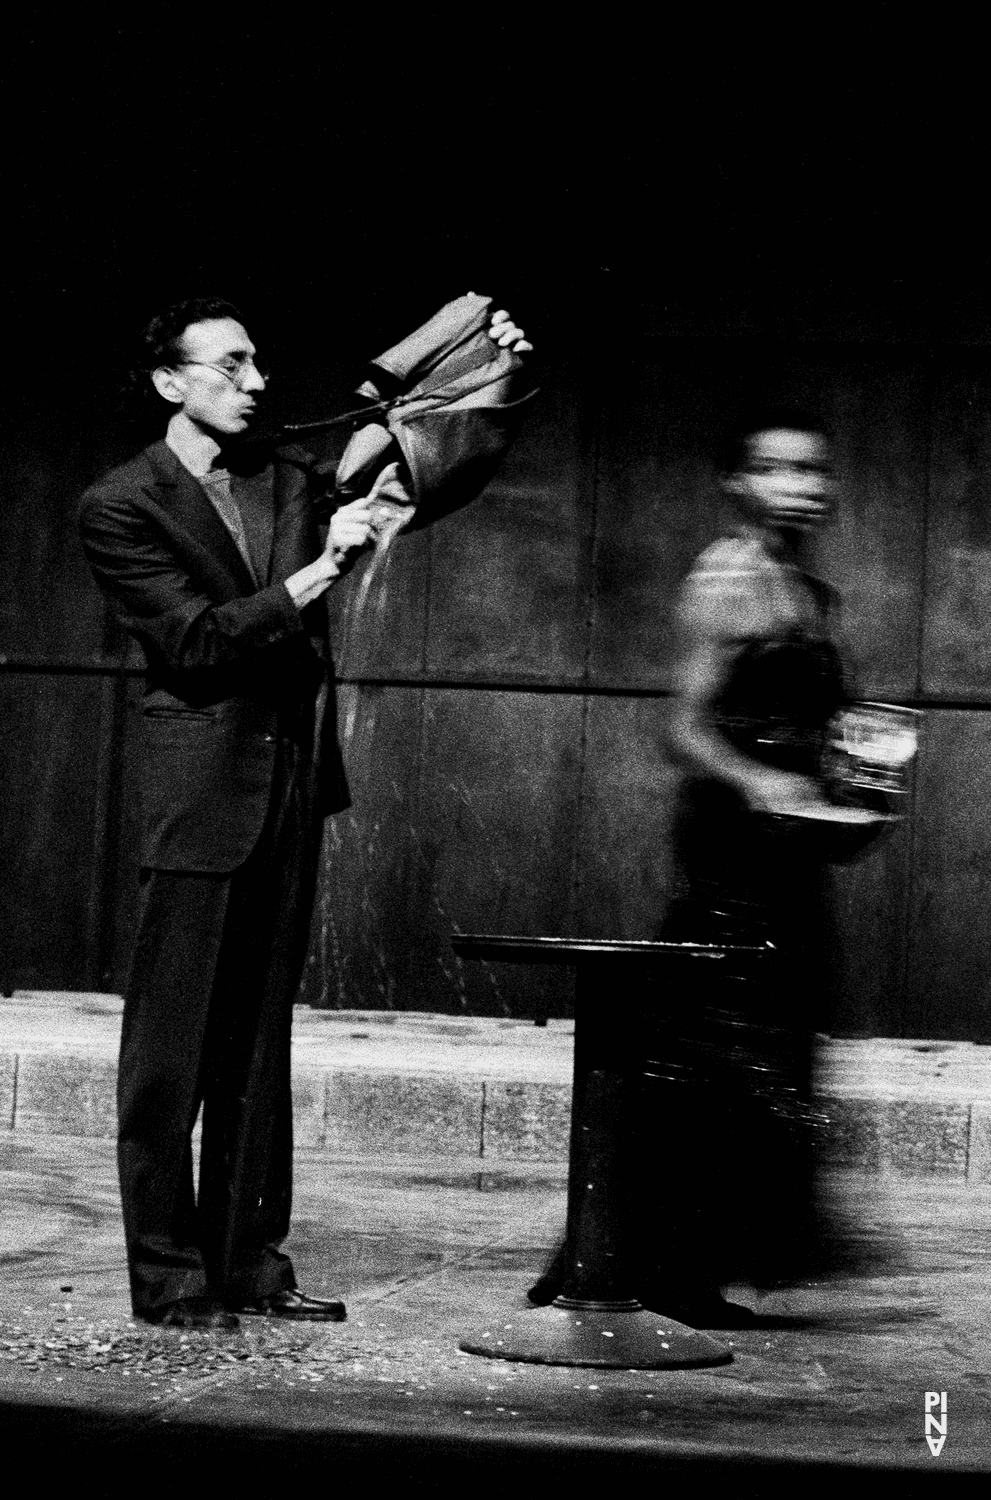 Quincella Swyningan and Jean Laurent Sasportes in “Palermo Palermo” by Pina Bausch